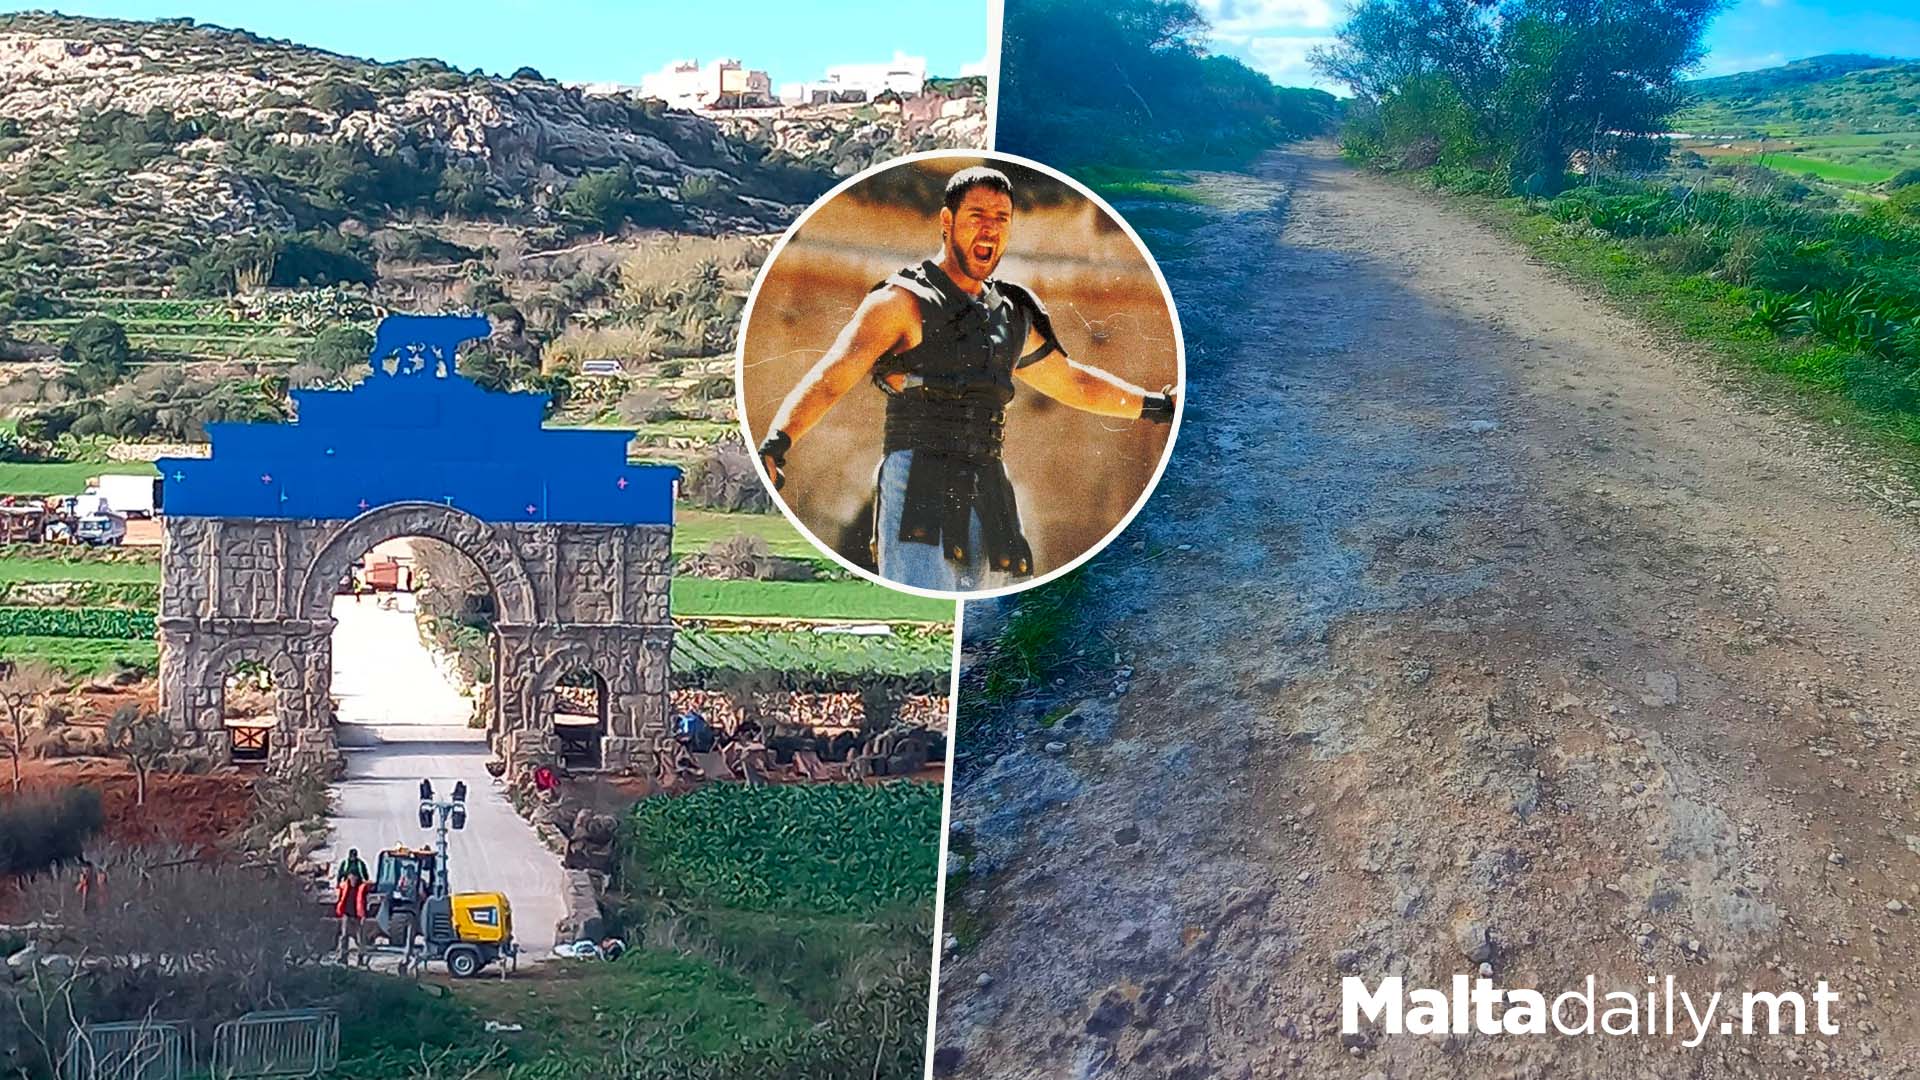 Gladiator Set Pops Up In Xemxija As Sequel Continues Filming